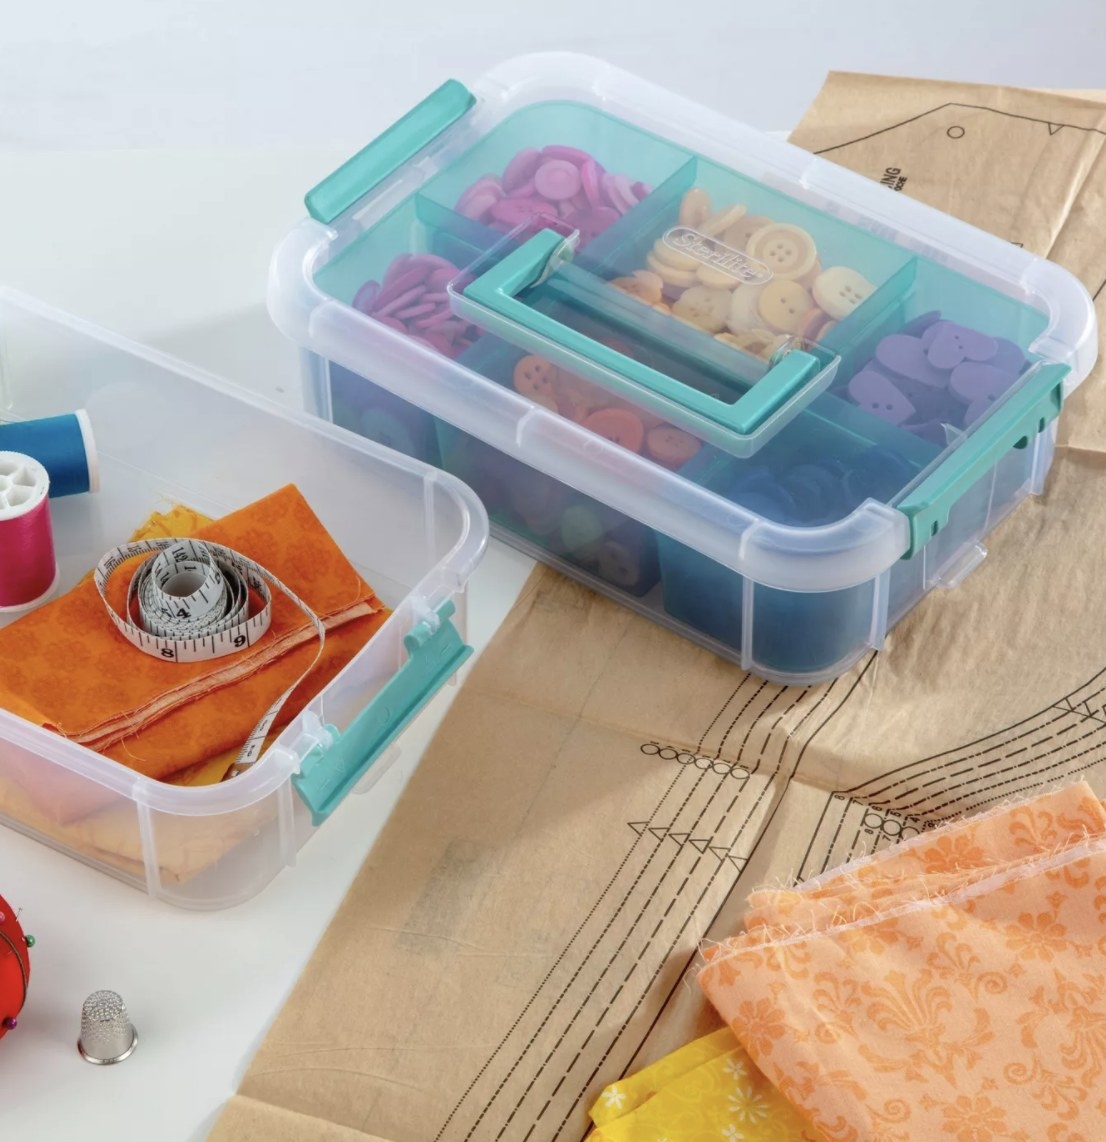 They clear and teal stacked organizational boxes are holding buttons and other sewing supplies